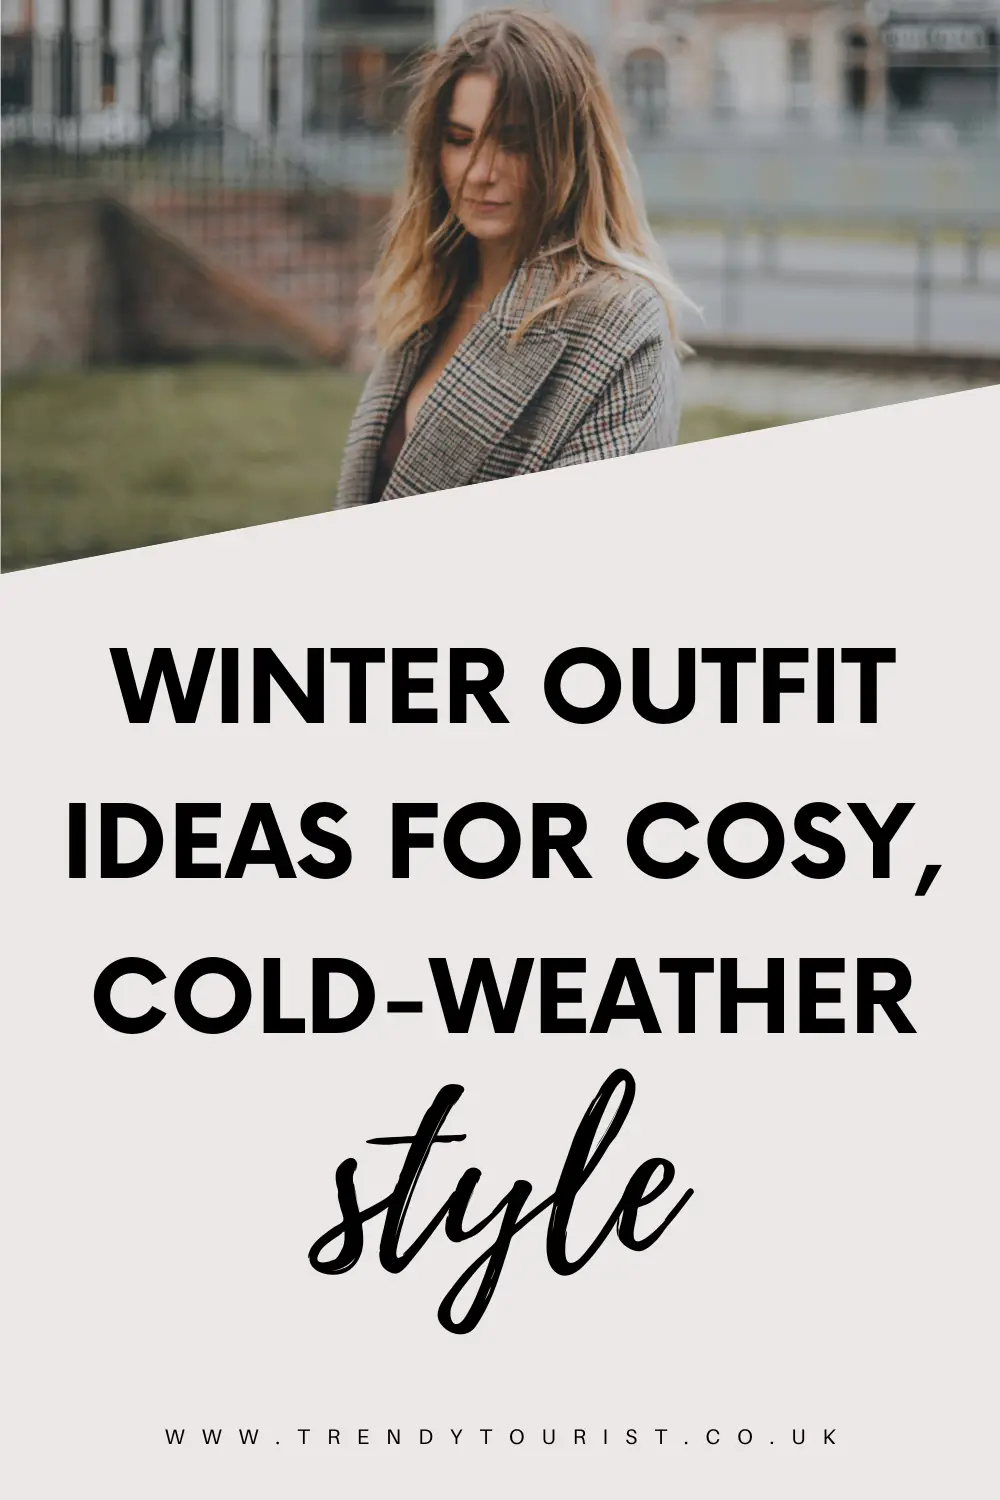 Winter Outfit Ideas for Cosy, Cold-Weather Style